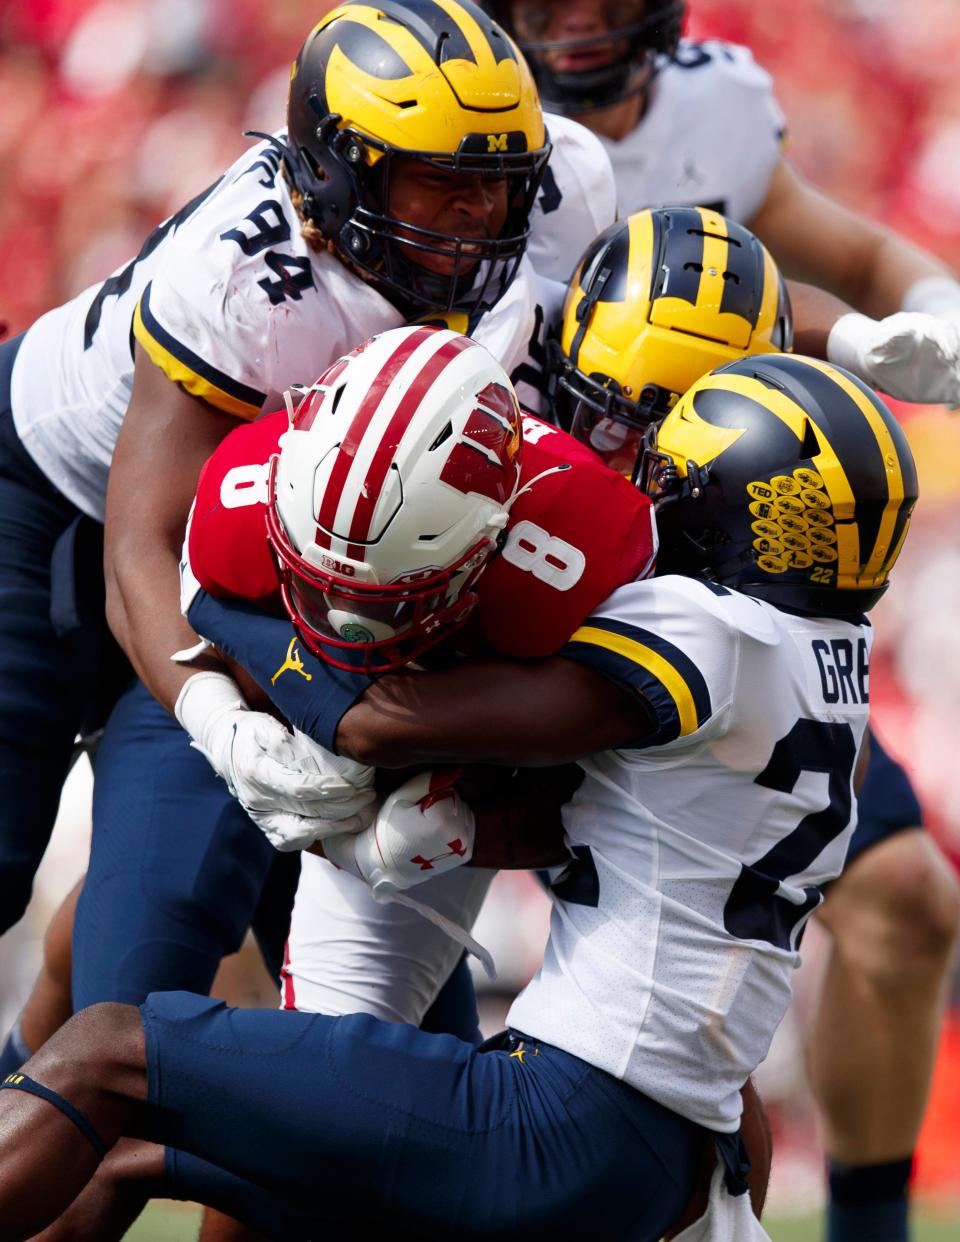 Wisconsin Badgers running back Jalen Berger is tackled by Michigan Wolverines defensive back Gemon Green (22) and defensive end Kris Jenkins (94) during the third quarter Oct. 2, 2021 at Camp Randall Stadium in Madison, Wis.